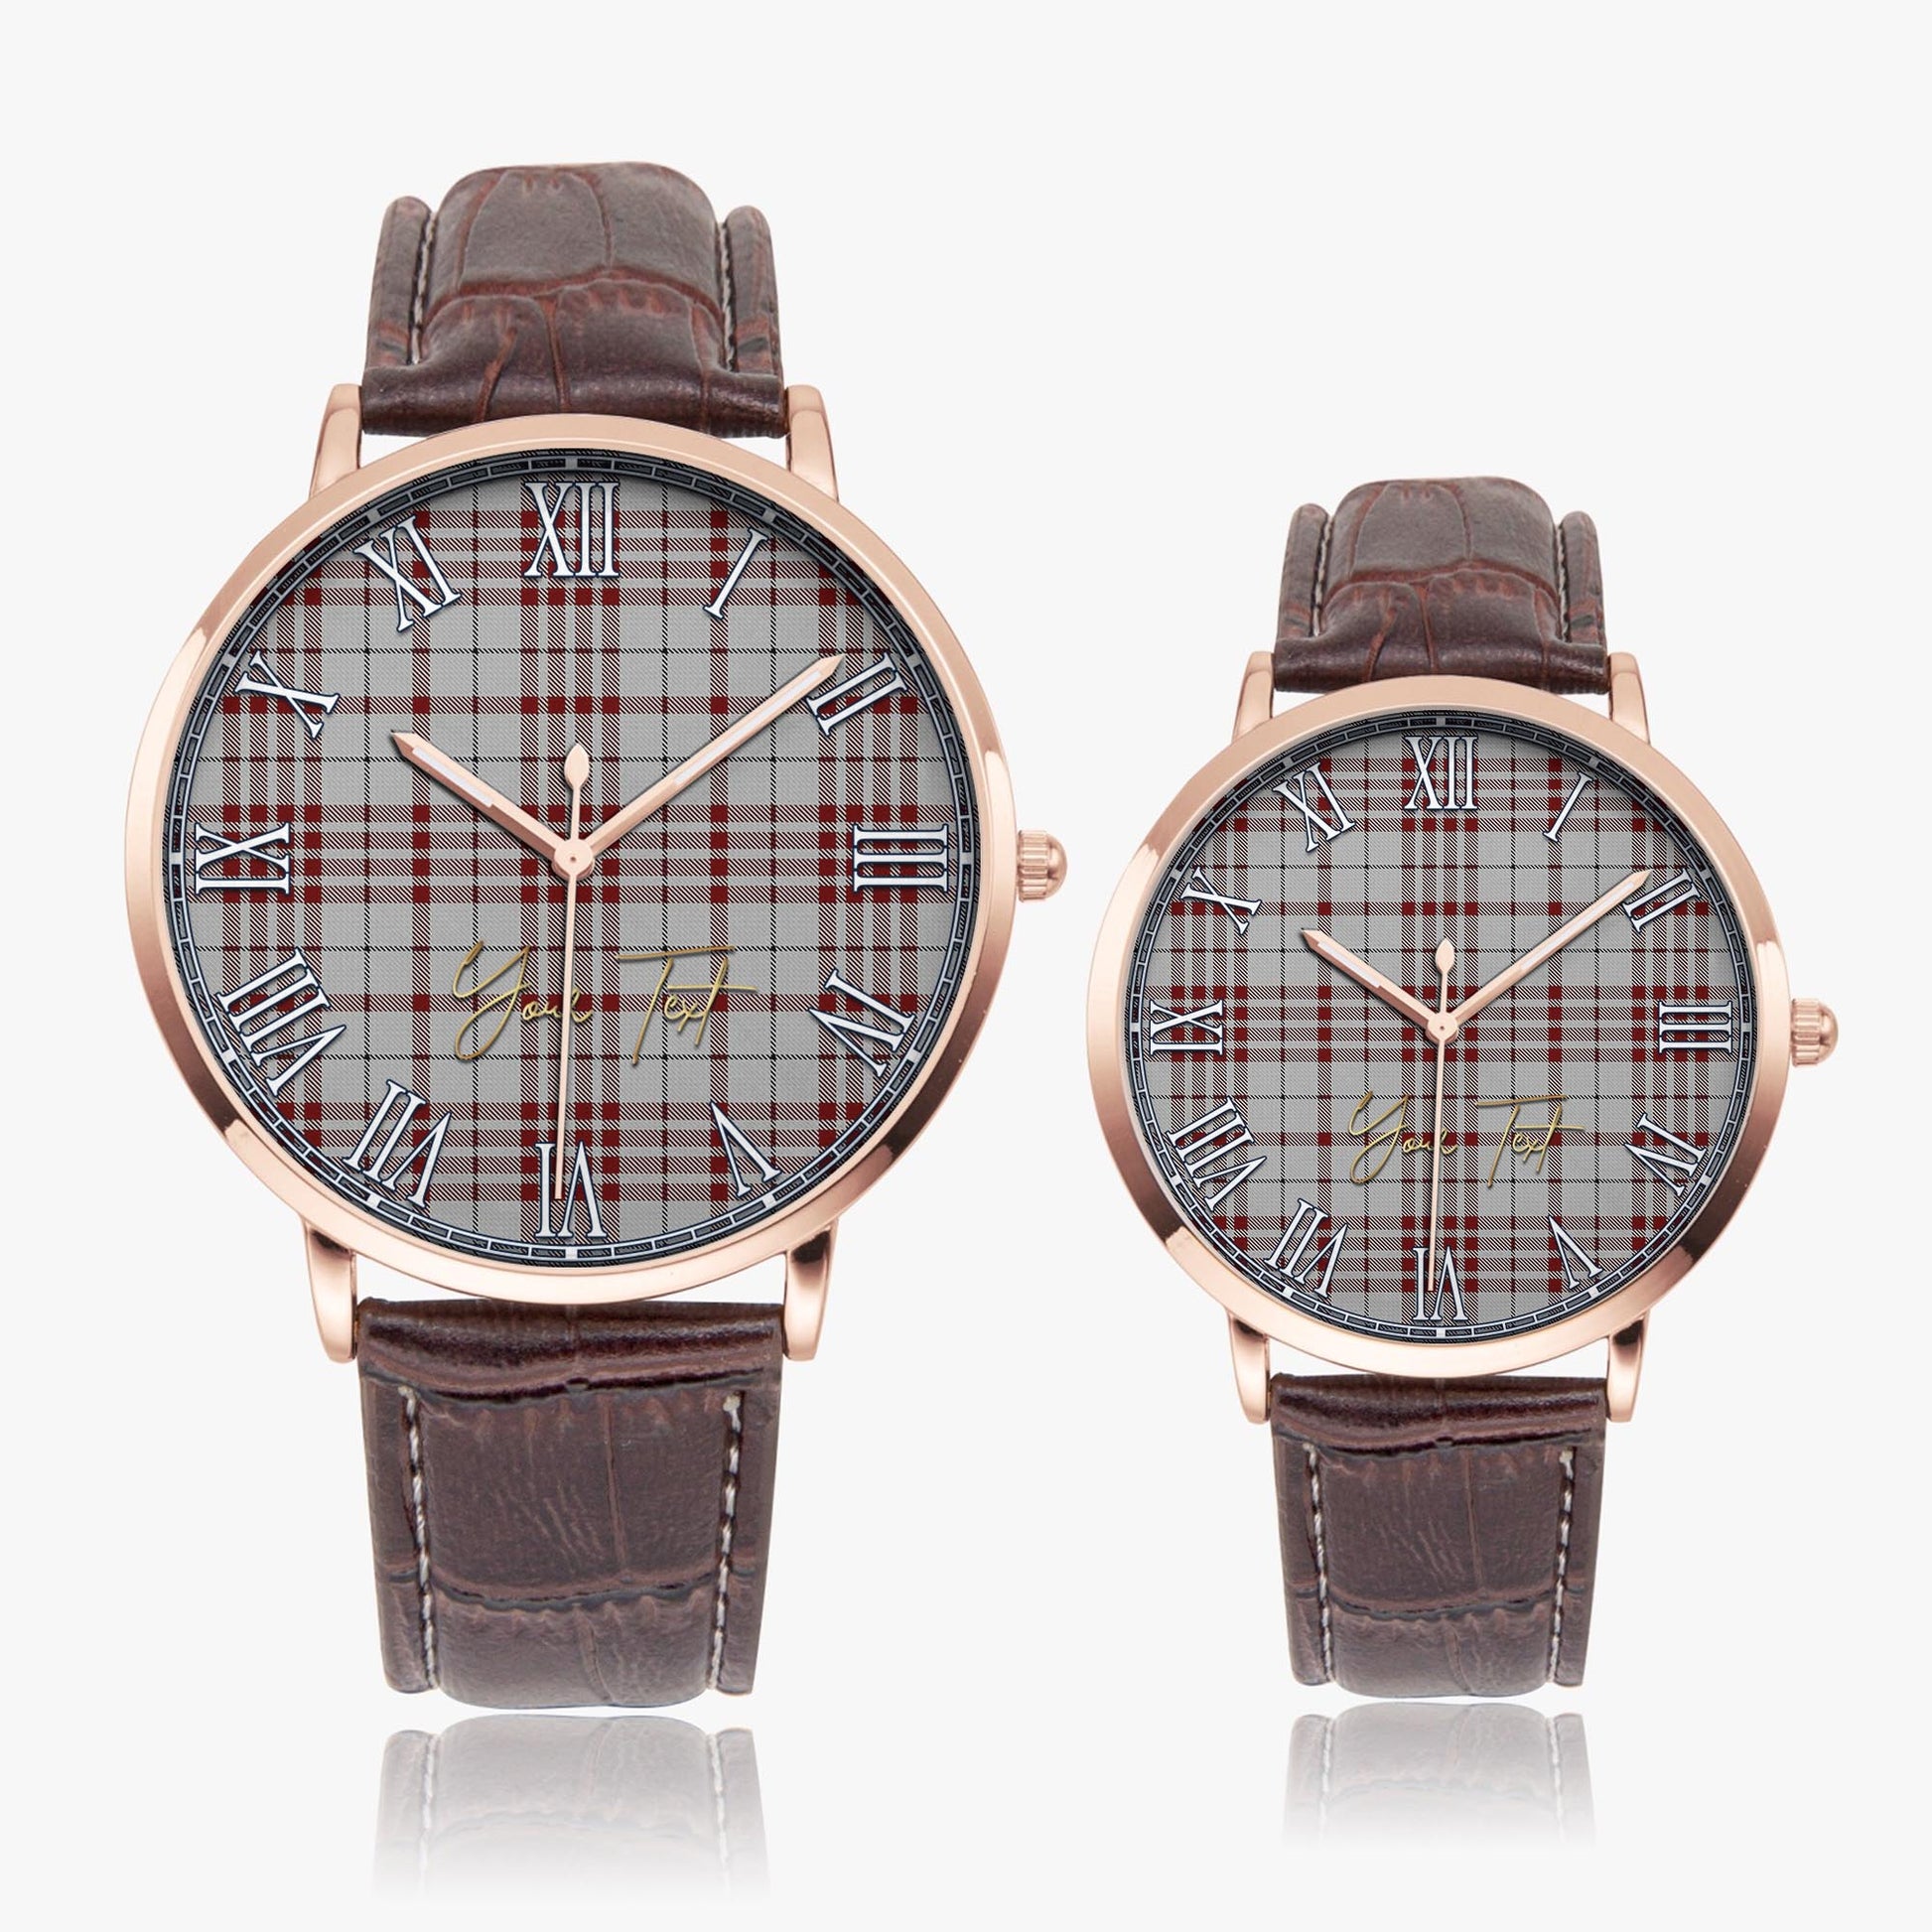 Clayton Tartan Personalized Your Text Leather Trap Quartz Watch Ultra Thin Rose Gold Case With Brown Leather Strap - Tartanvibesclothing